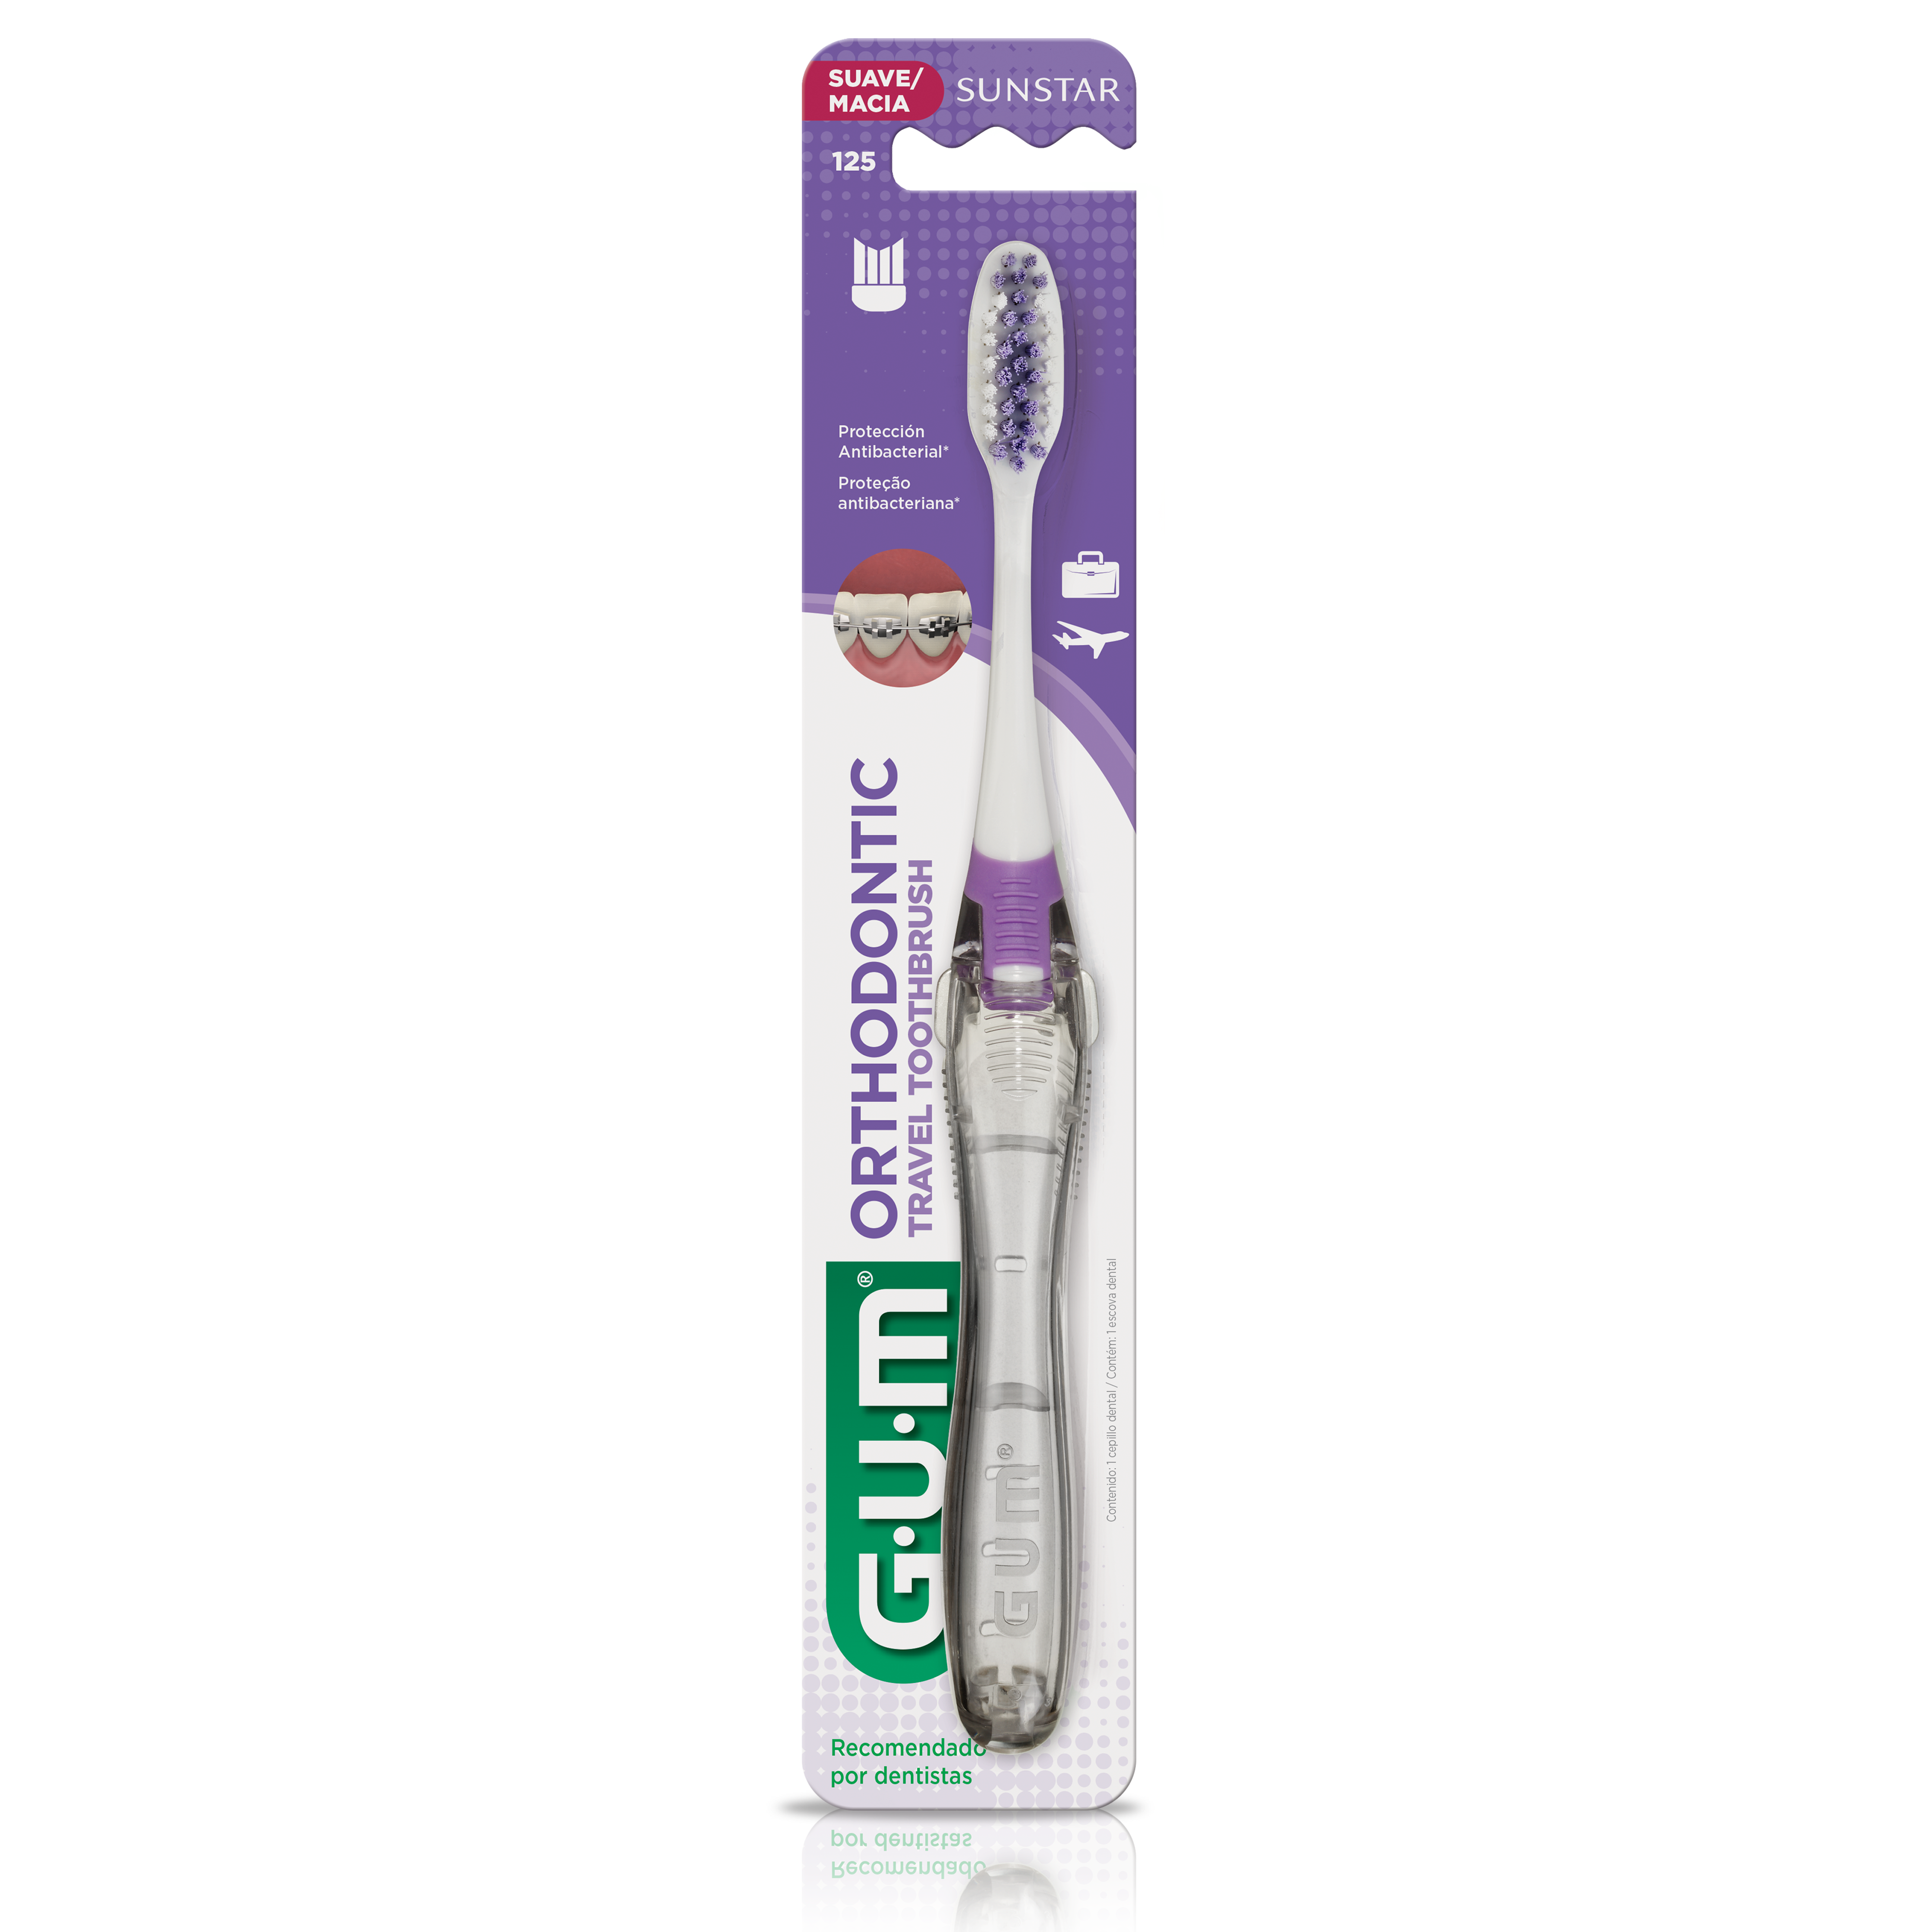 125LY-Product-Packaging-Toothbrush-Ortho-Travel-front-1ct.png